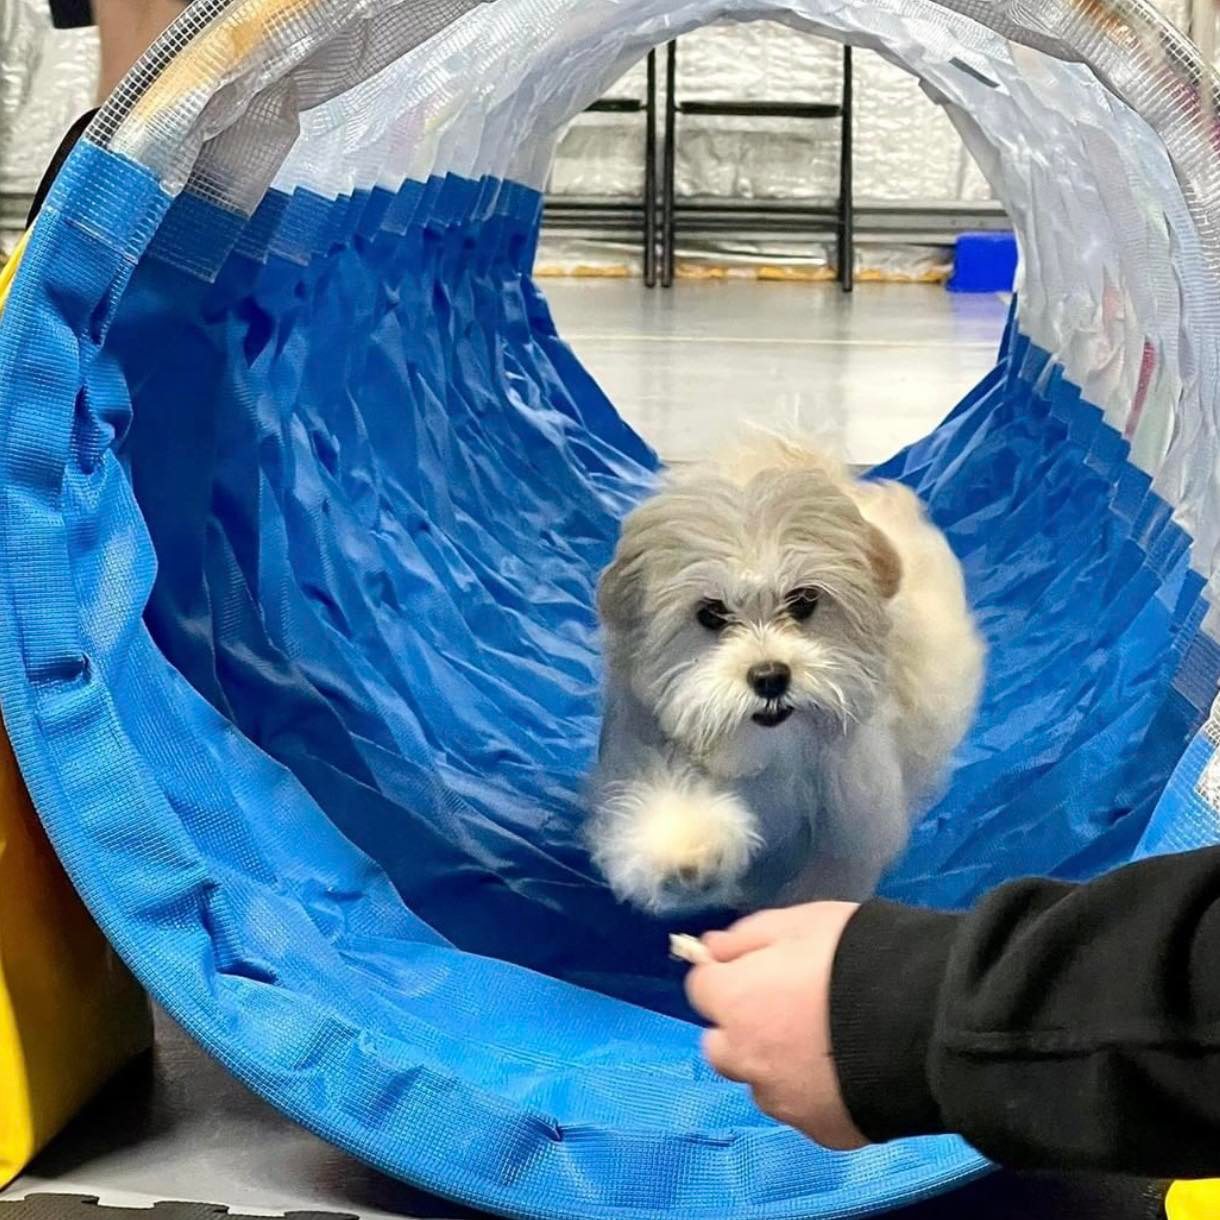 A dog name Maisy in a tunnel during training